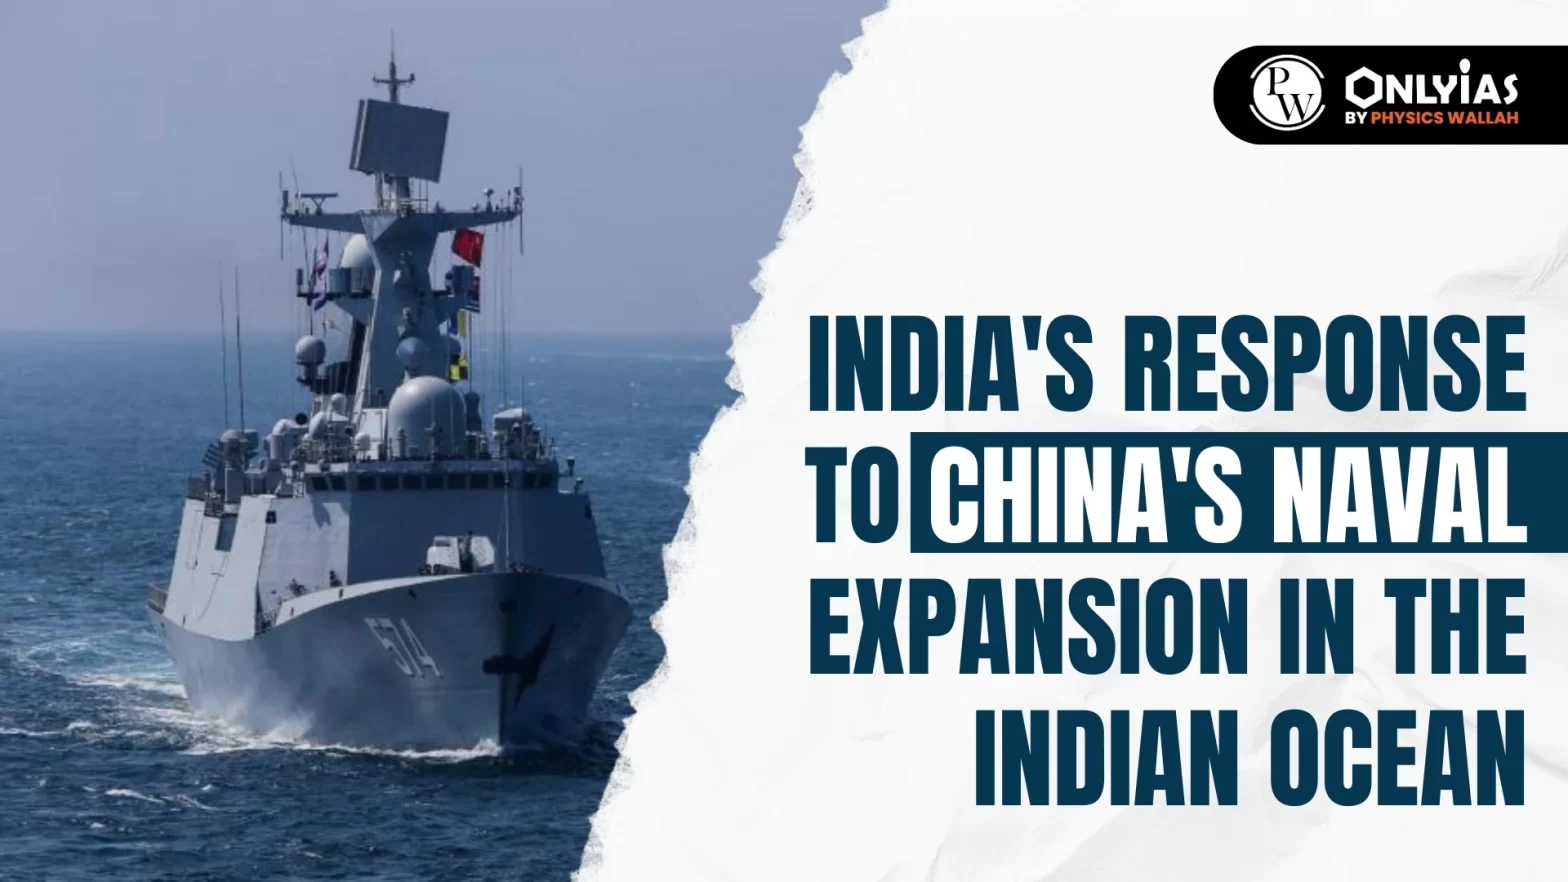 India’s Response to China’s Naval Expansion in the Indian Ocean